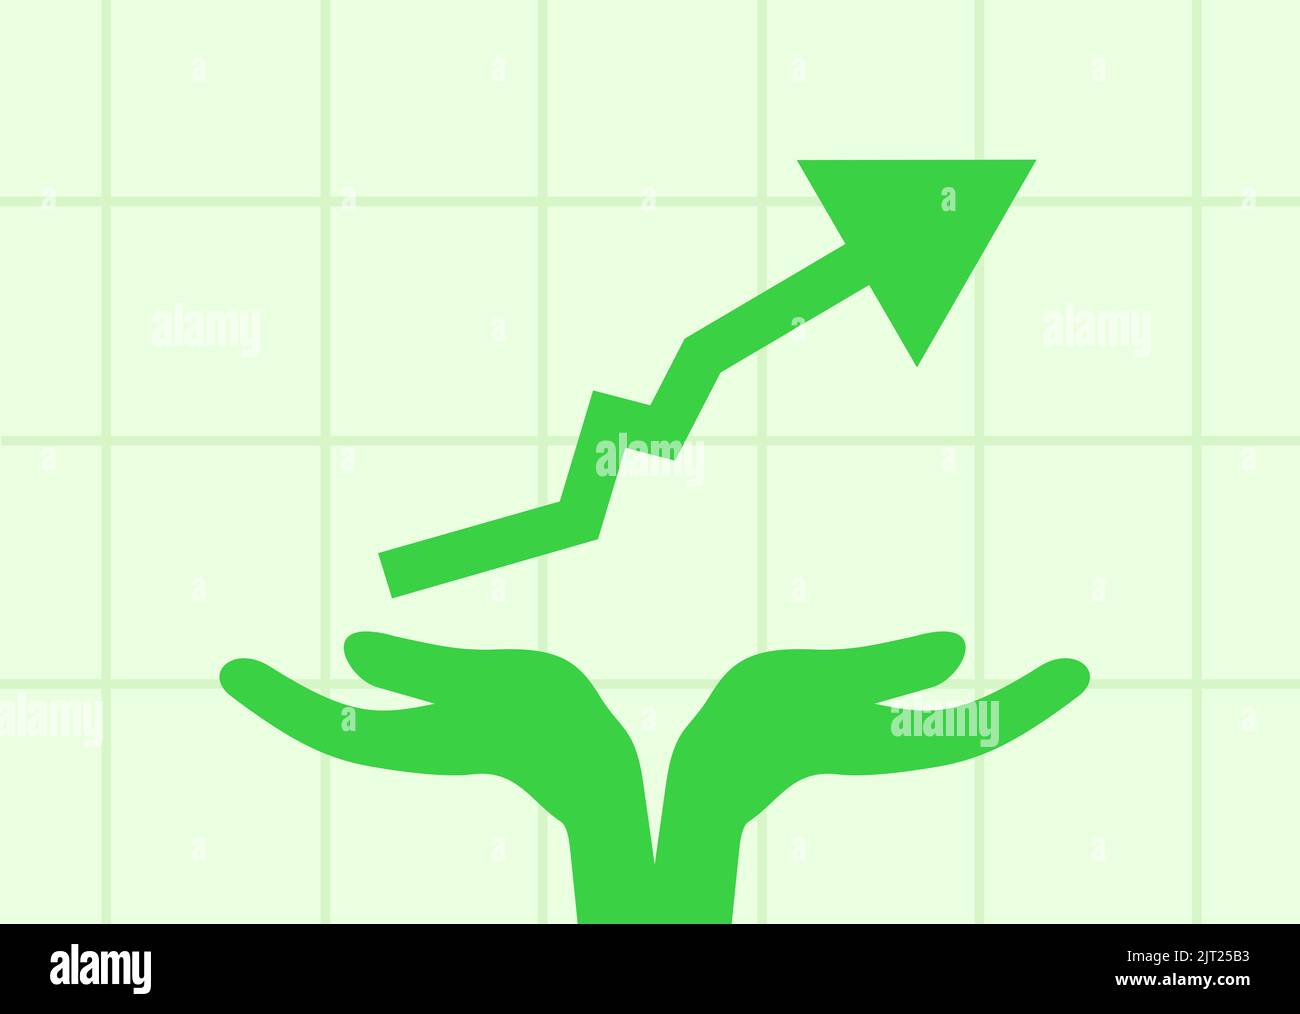 Hands and growing chart, diagram and graph as metaphor for profitable sustainability and esg socially responsible investing.  Vector illustration. Stock Photo